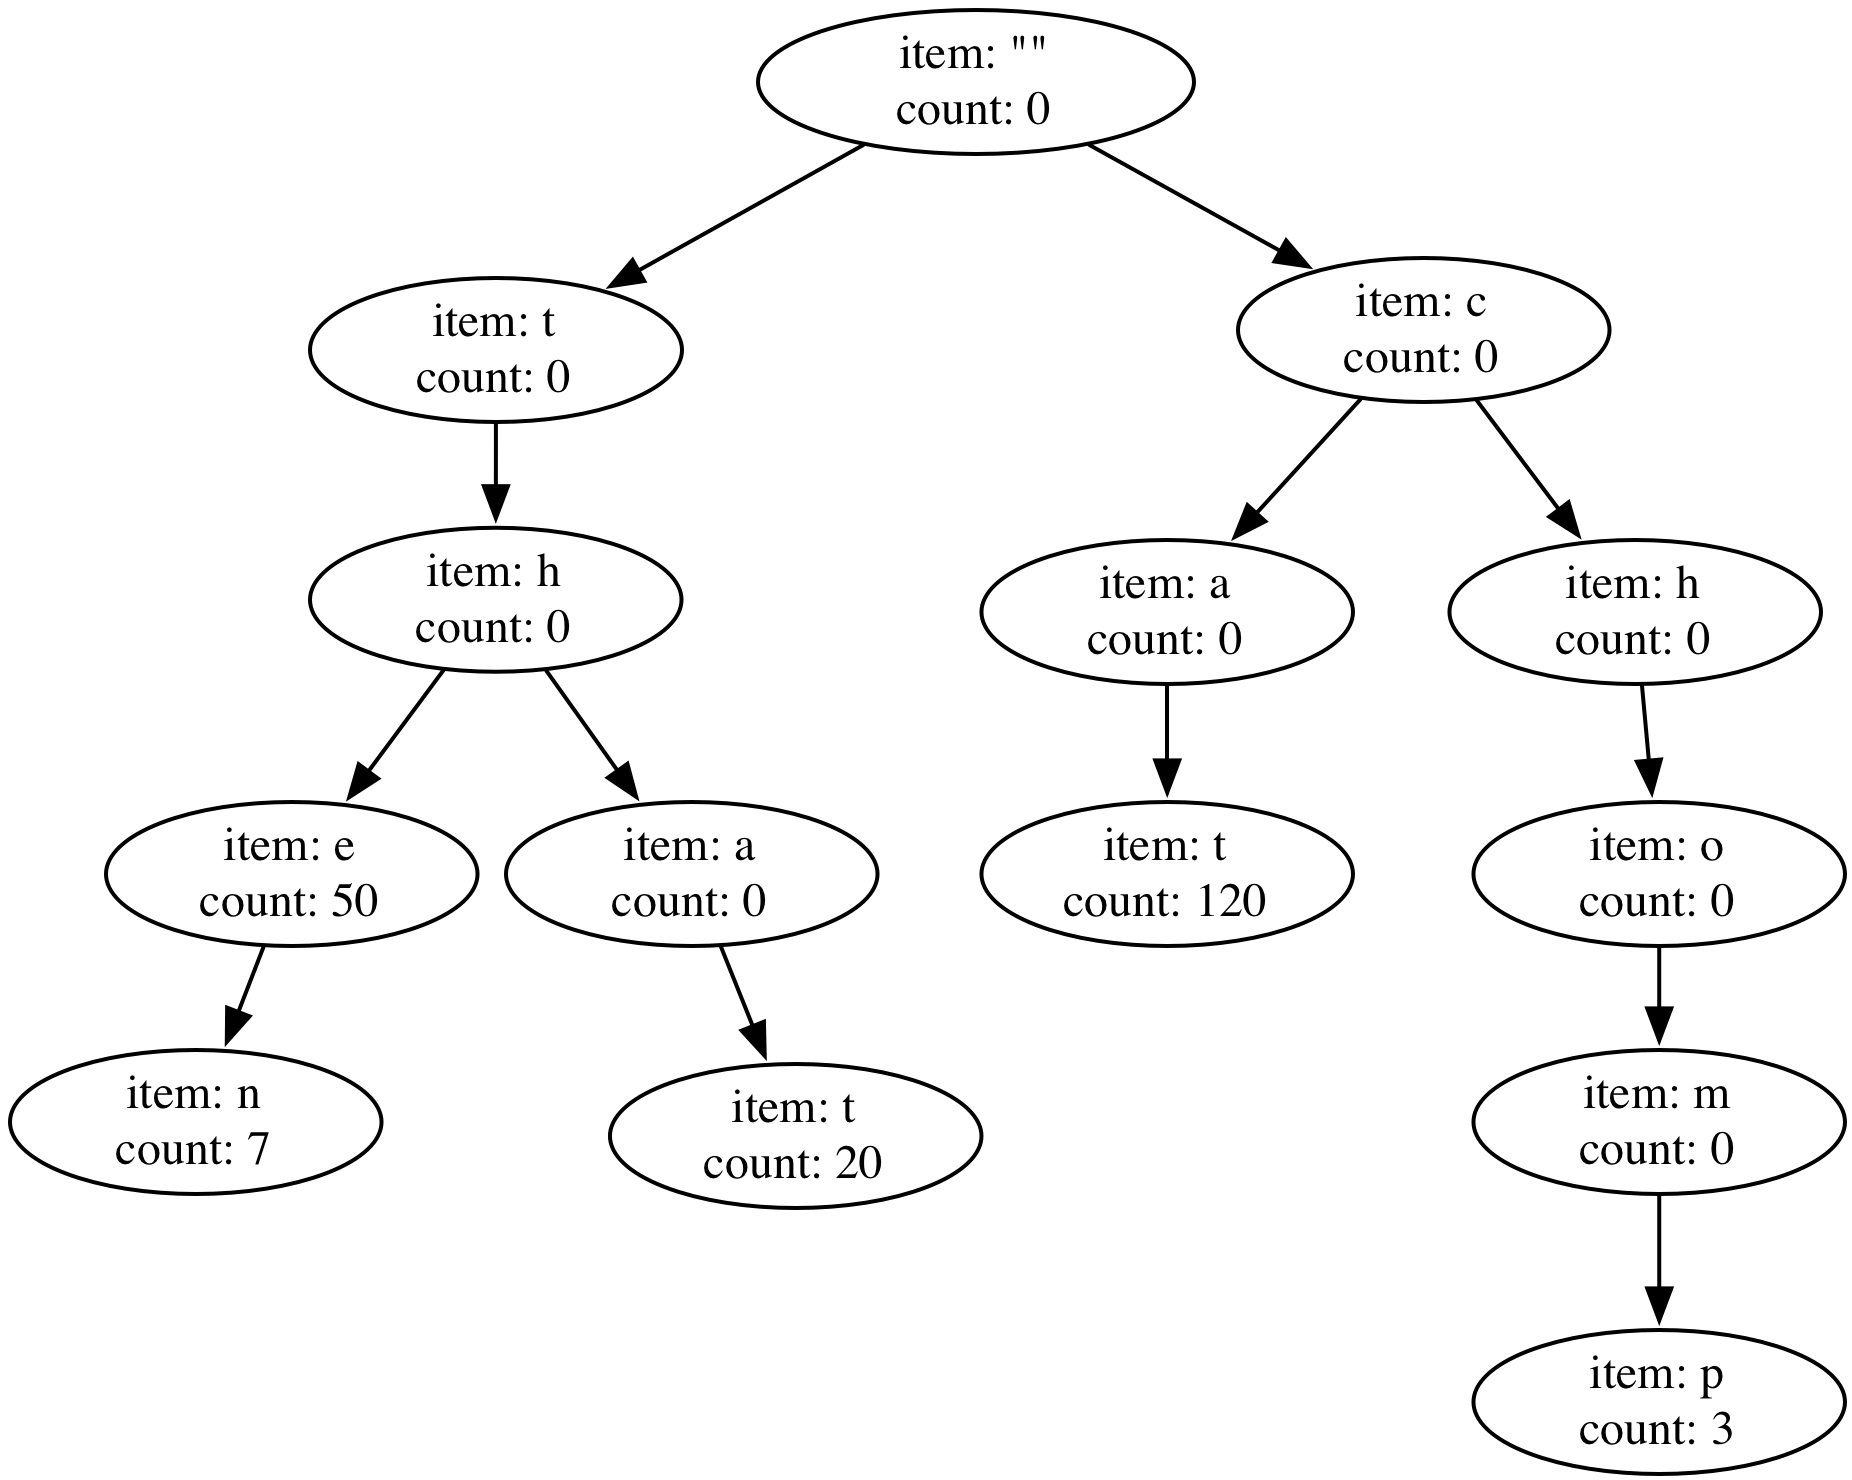 Tree with nodes showing characters and counts